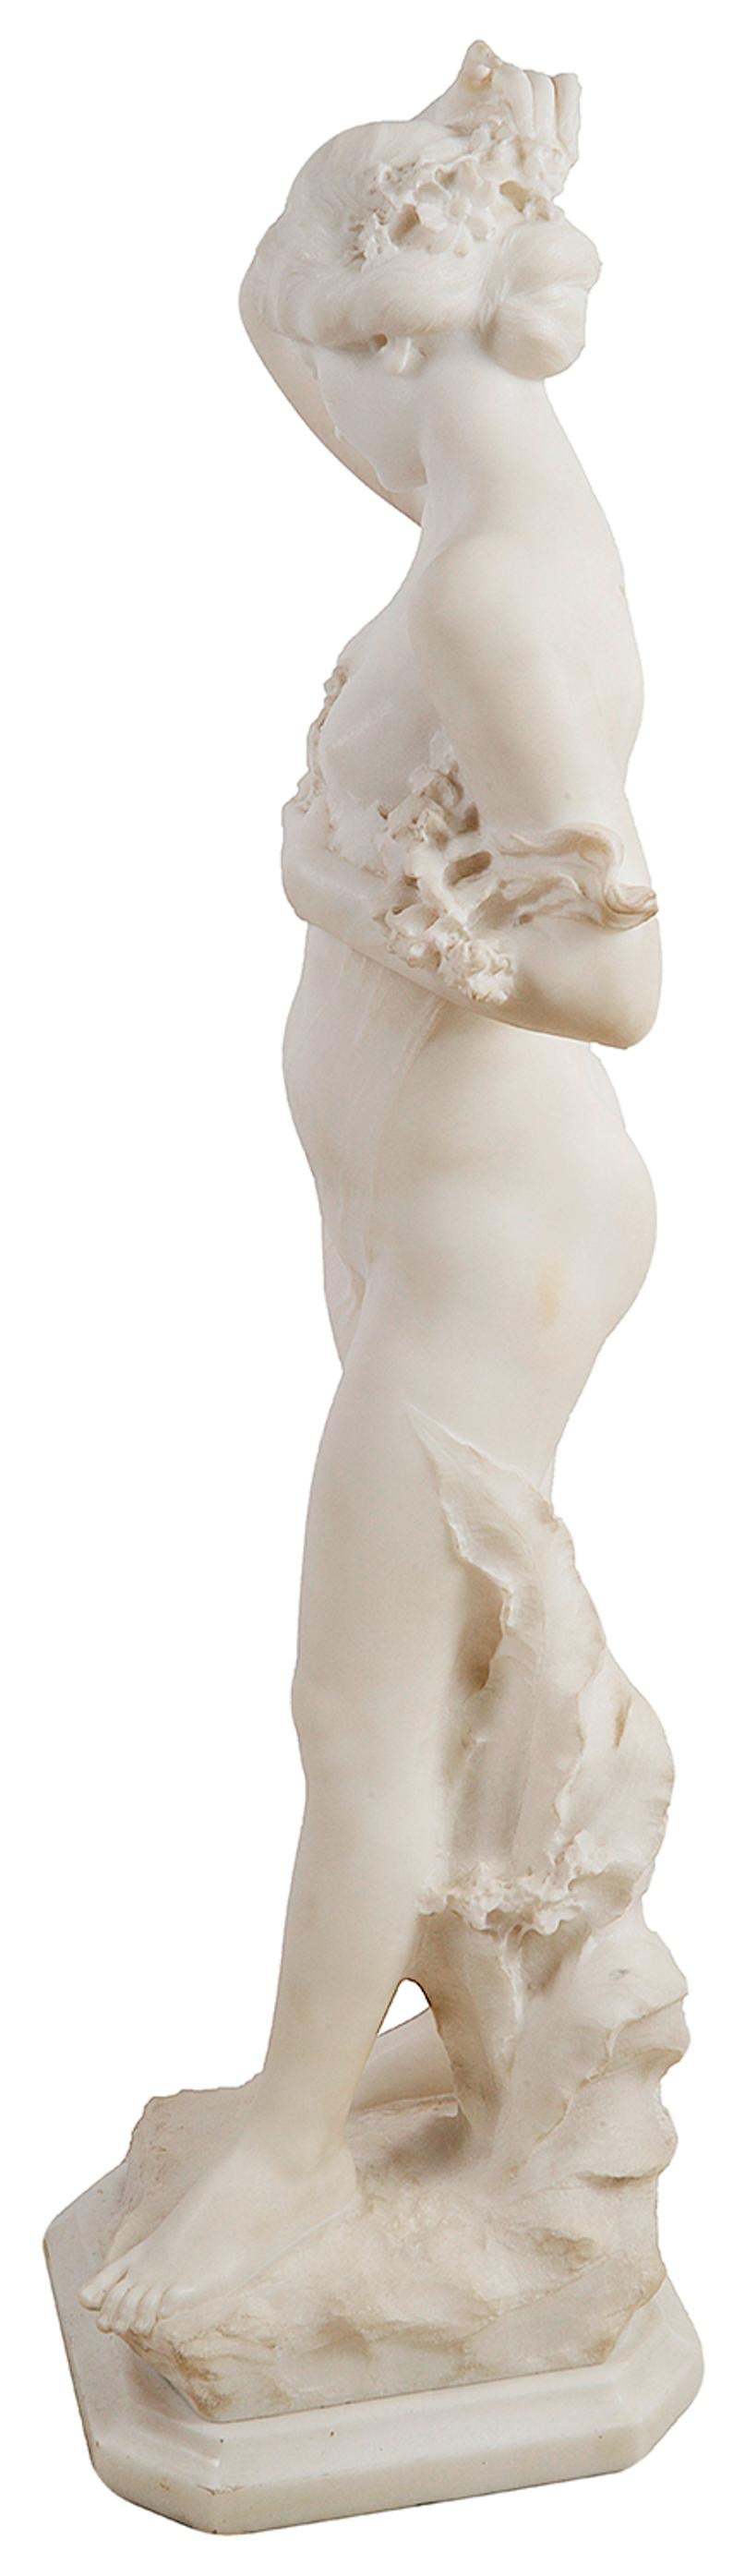 A fine quality 19th century Carrara marble study of a nude Nymph holding flowers by Pietro Bazzanti. Measures: 103cm(40.5